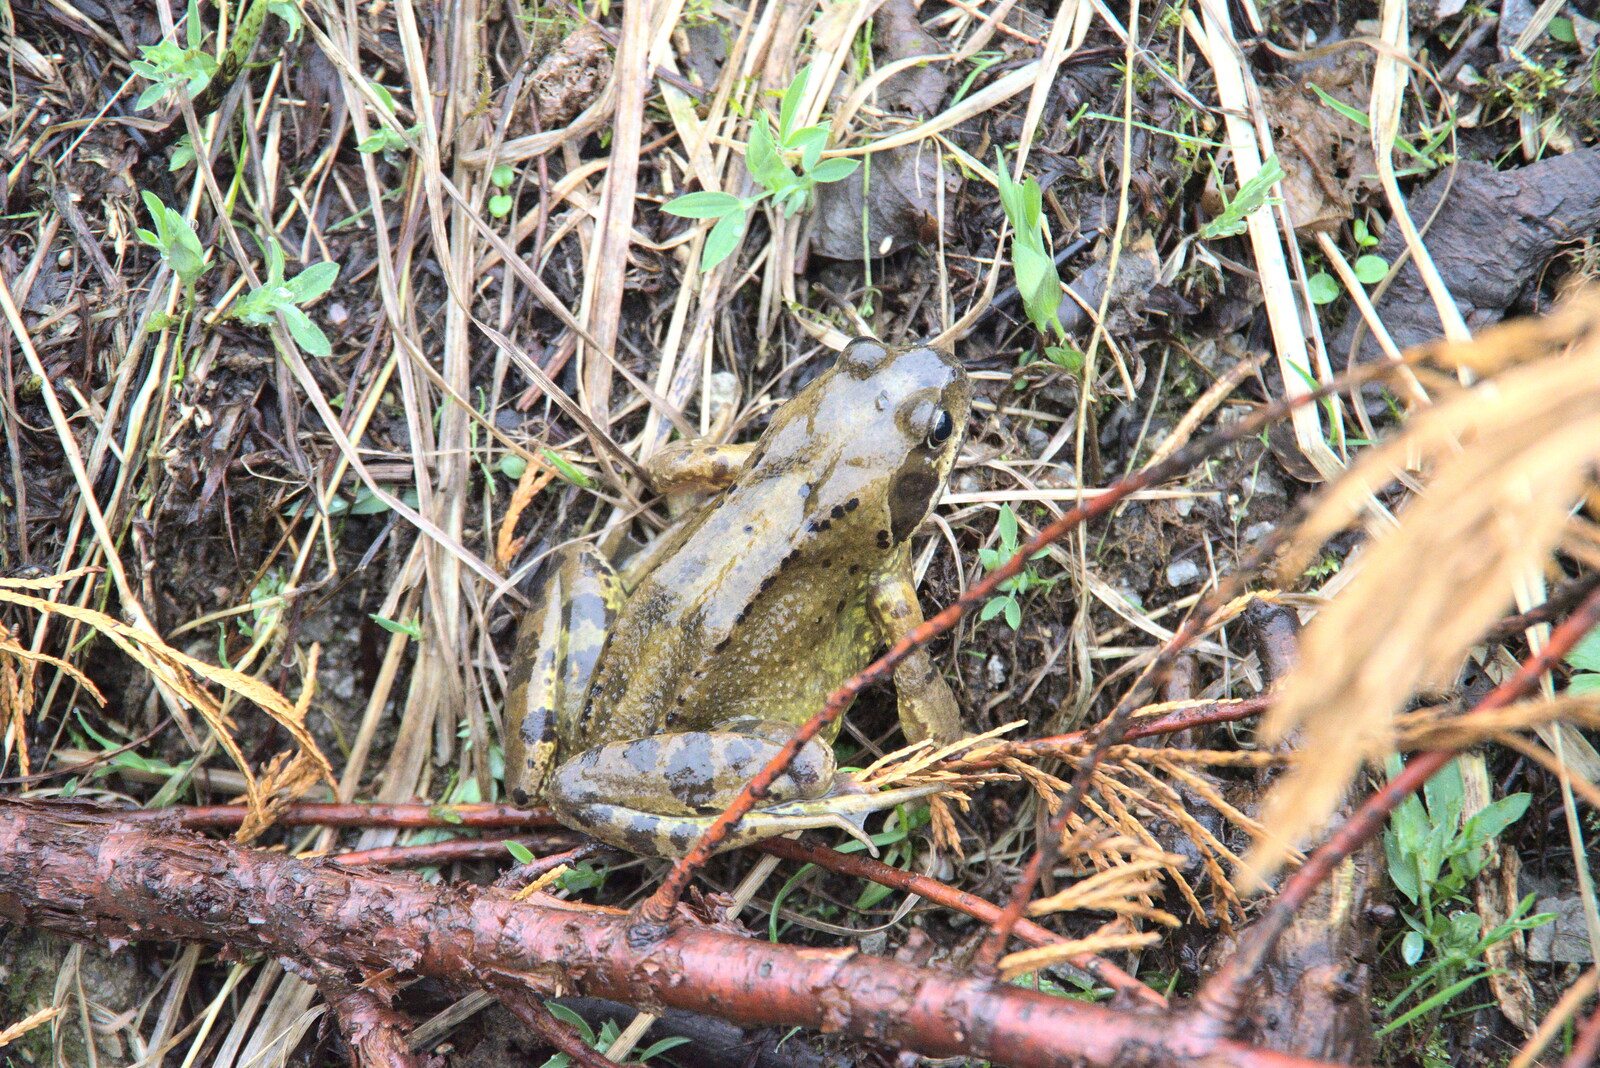 The frog legs it from Manorhamilton and Bundoran, Leitrim and Donegal, Ireland - 16th April 2022